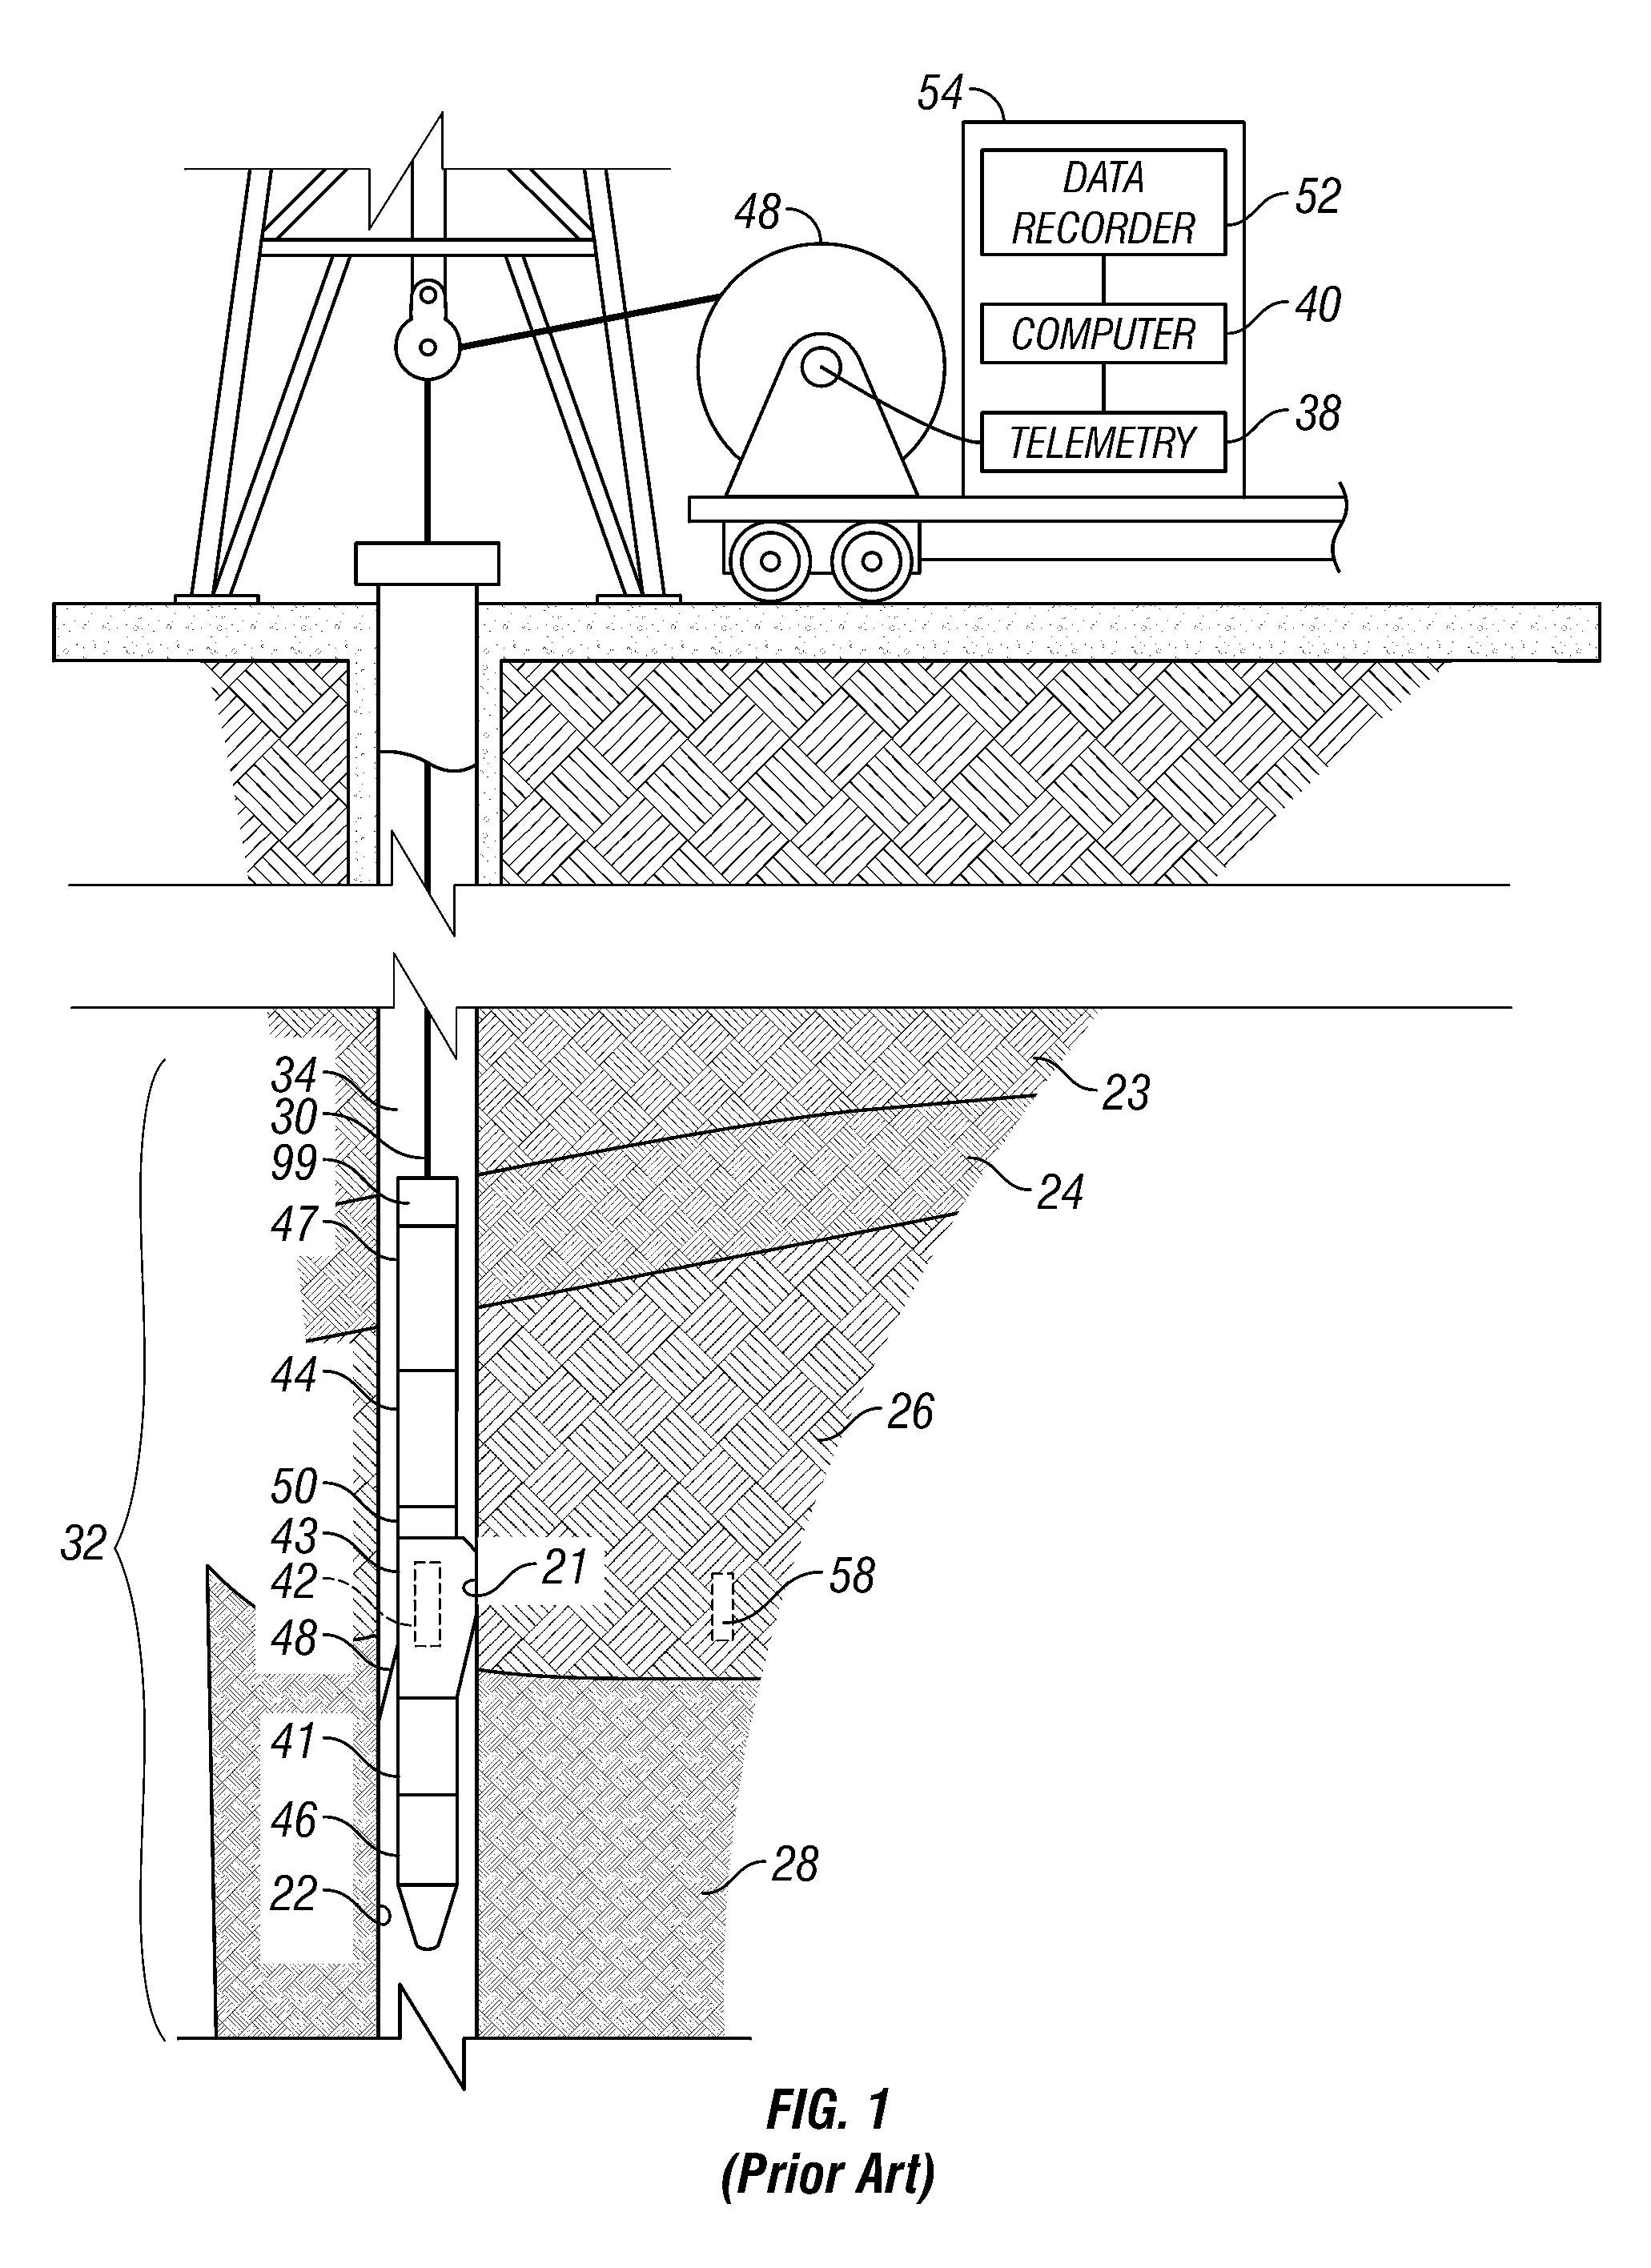 Frequency dithering to avoid excitation pulse ringing